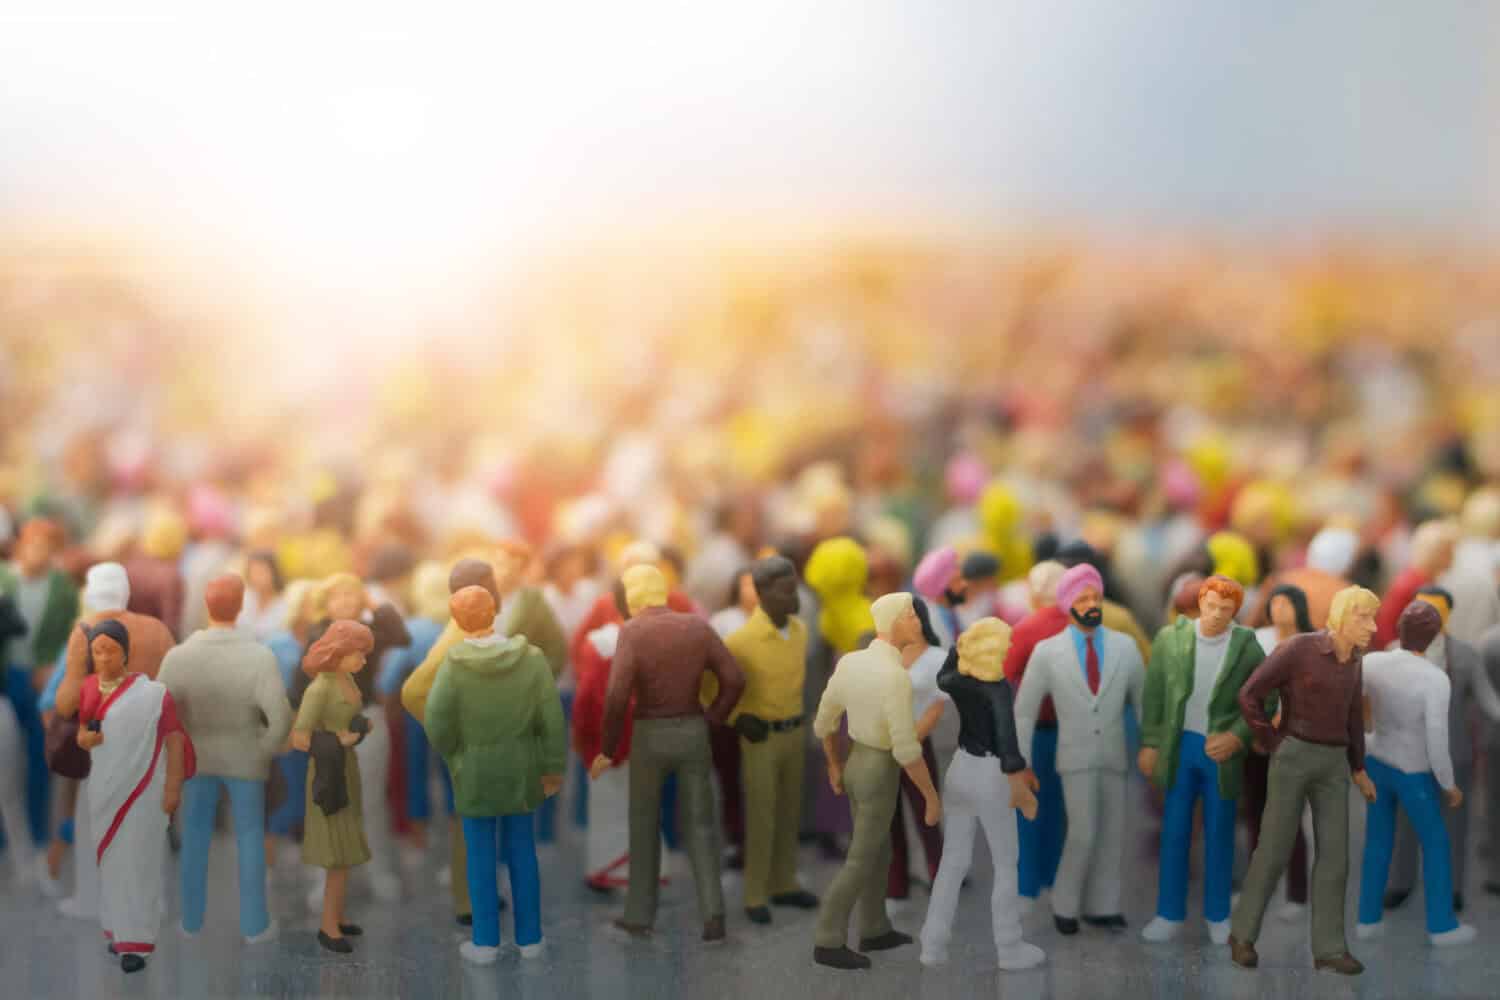 Colorful miniature crowd in the Sun. Multiracial gathering of people.